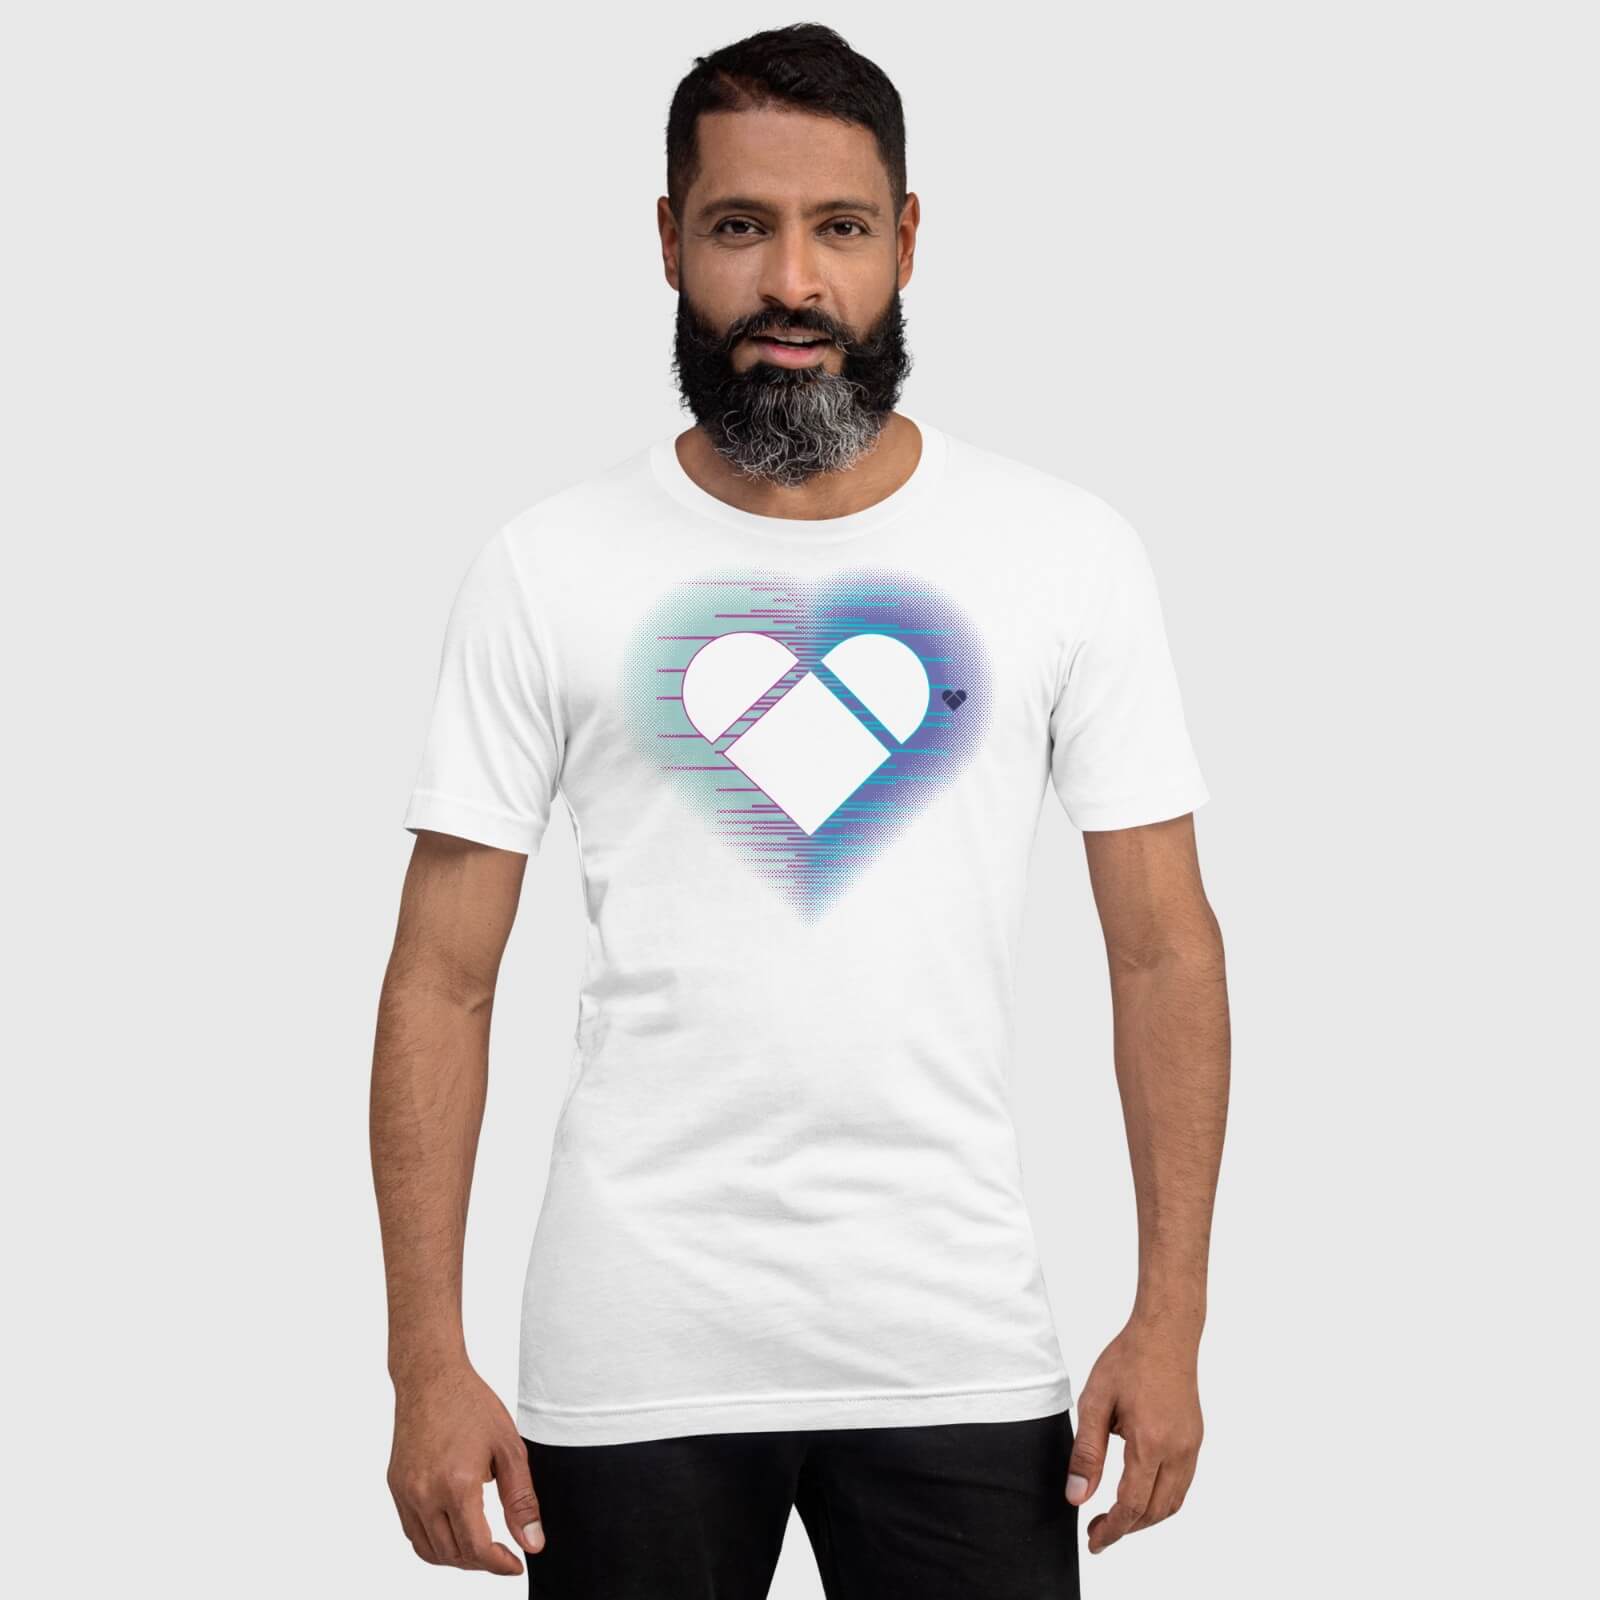 Versatile white tee with heart logo and dual aura for inclusive fashion by CRiZ AMOR